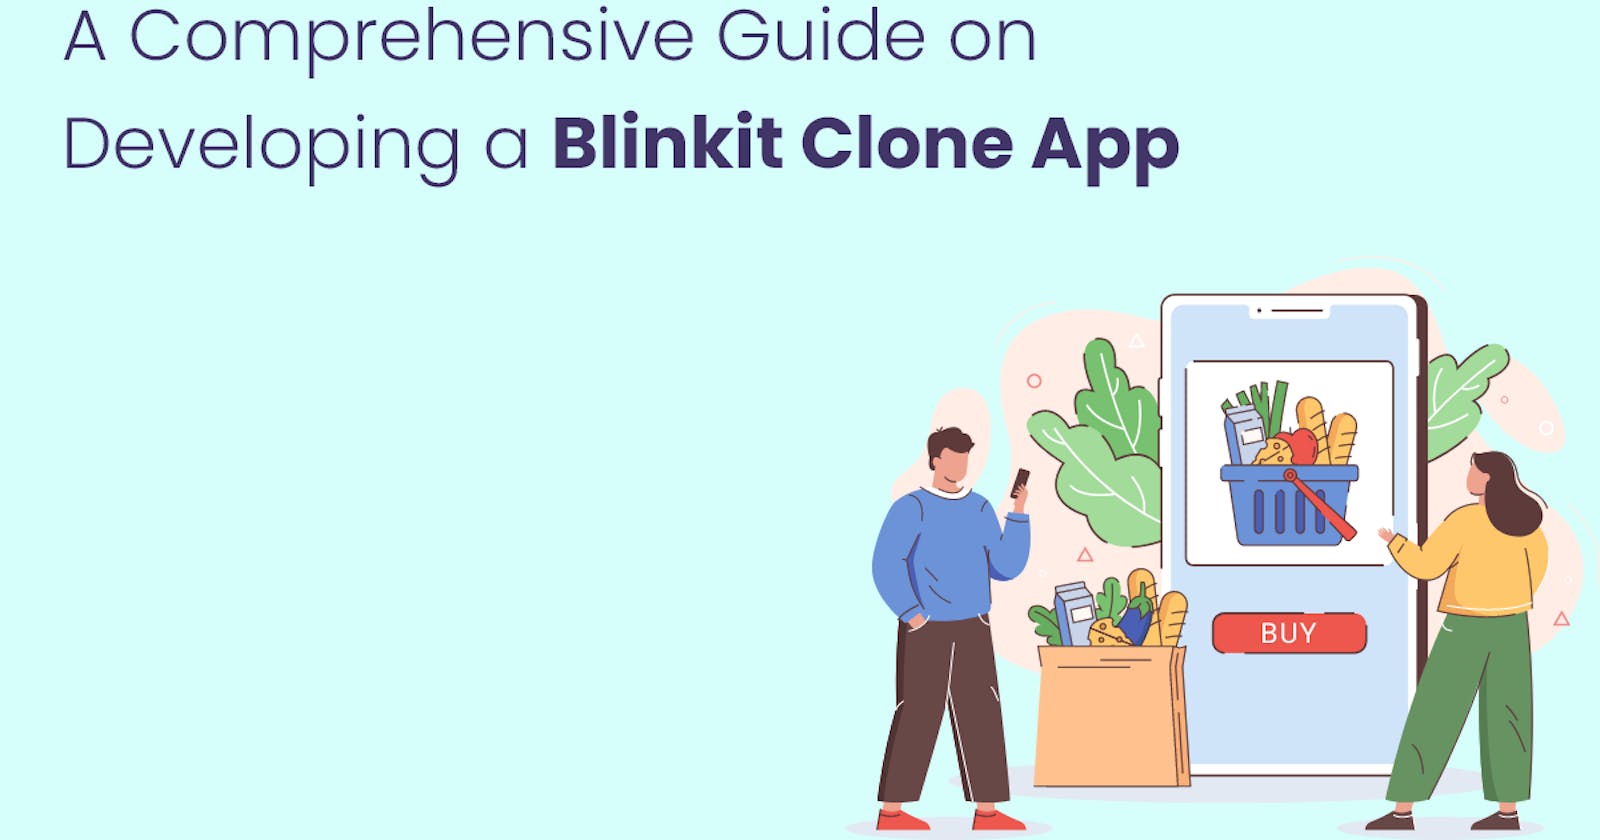 A Comprehensive Guide on Developing a Blinkit Clone App